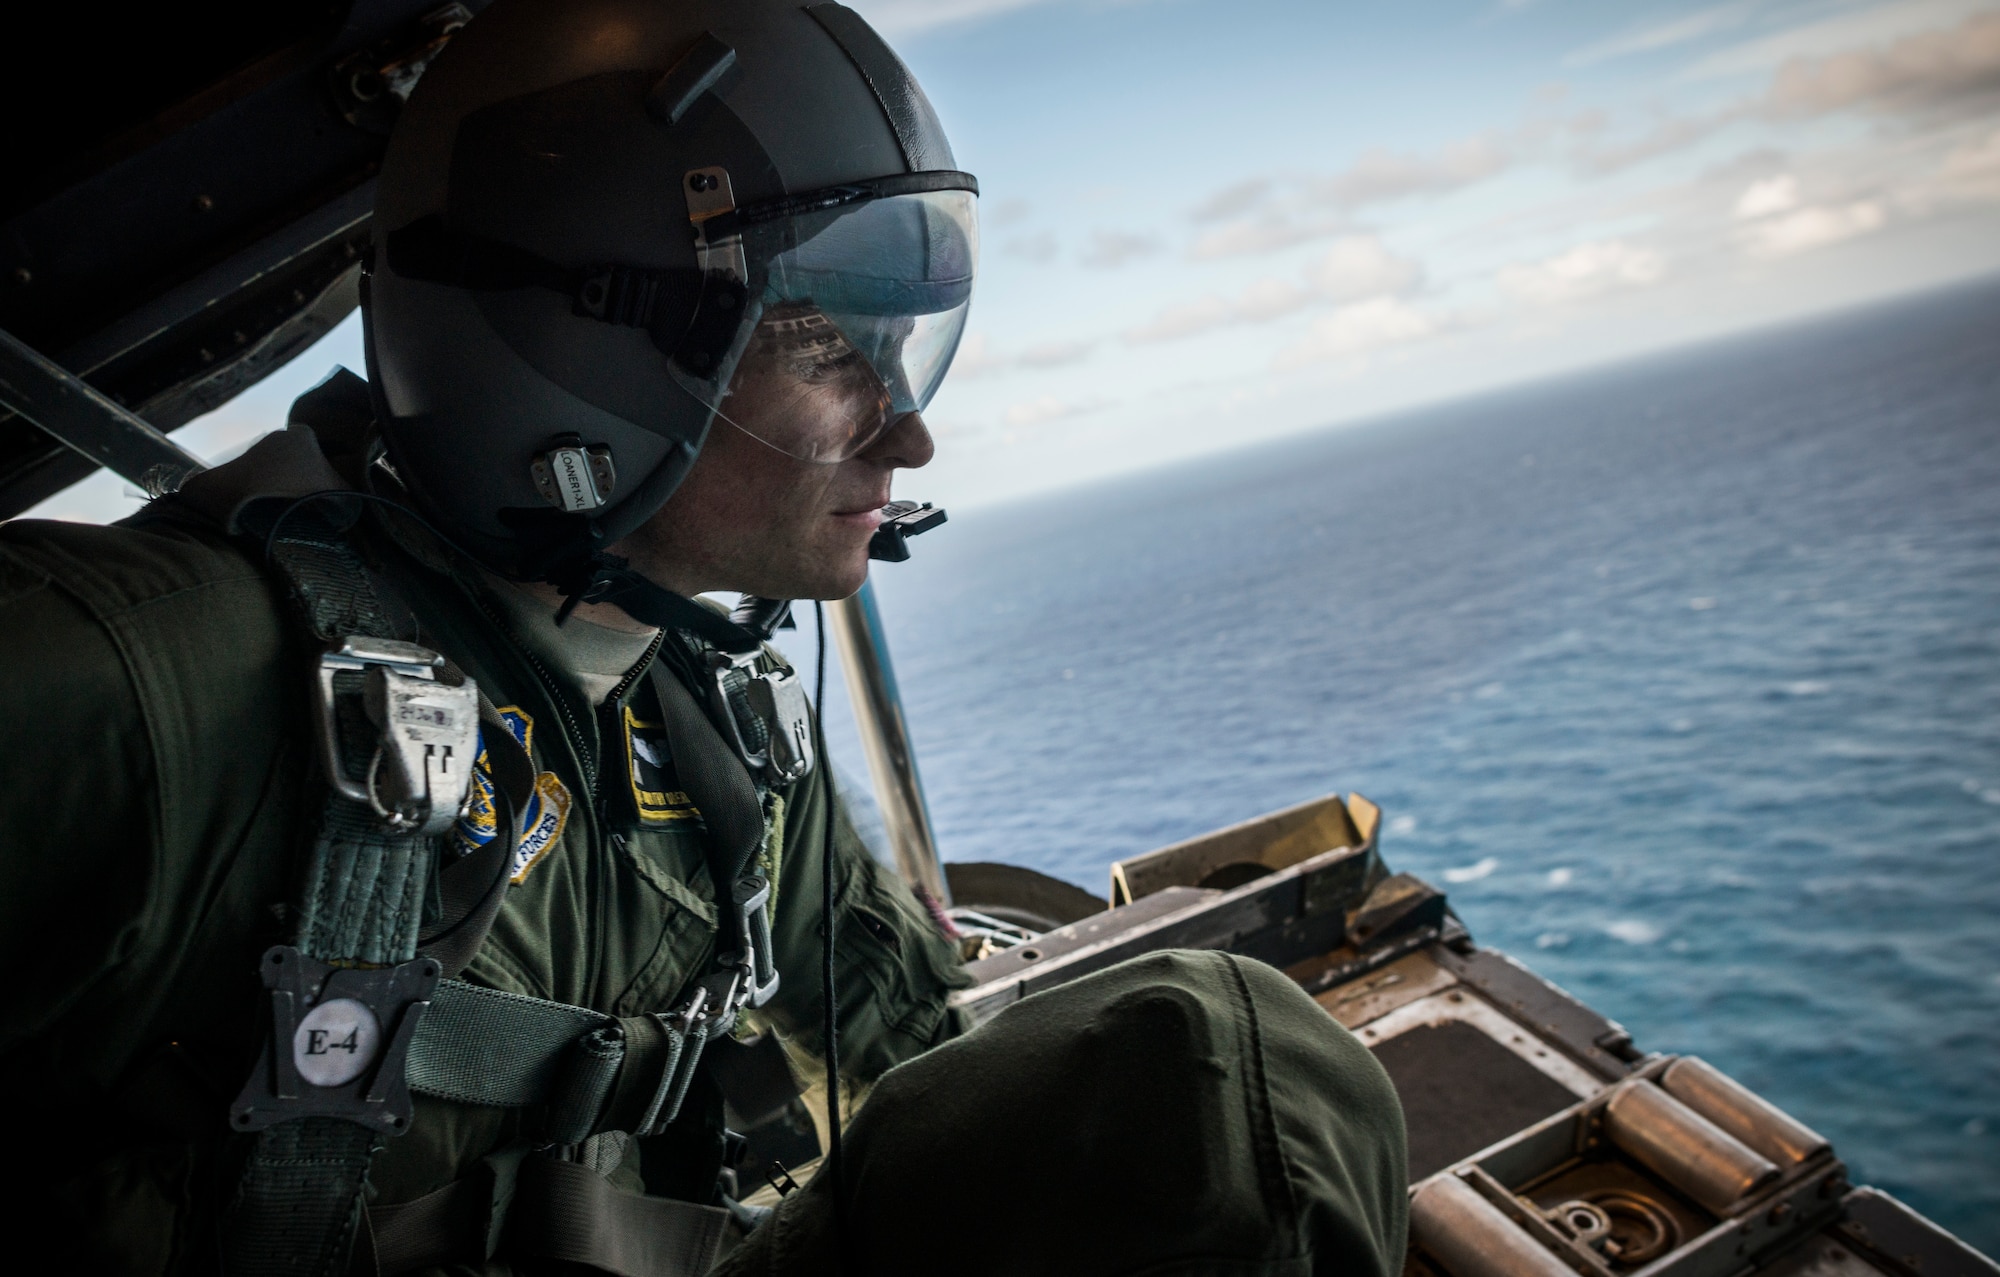 OVER THE PACIFIC OCEAN -- Senior Airman Timothy Oberman, 36th Airlift Squadron loadmaster, looks out over a drop zone from a C-130 Hercules after delivering humanitarian bundles to the island of Ulal, Dec. 11, 2012. Loadmasters are responsible for most of what happens in the back of a C-130, taking care of passengers, securing cargo and assisting the flight deck with takeoff and landing procedures. (U.S. Air Force photo by Tech. Sgt. Samuel Morse)